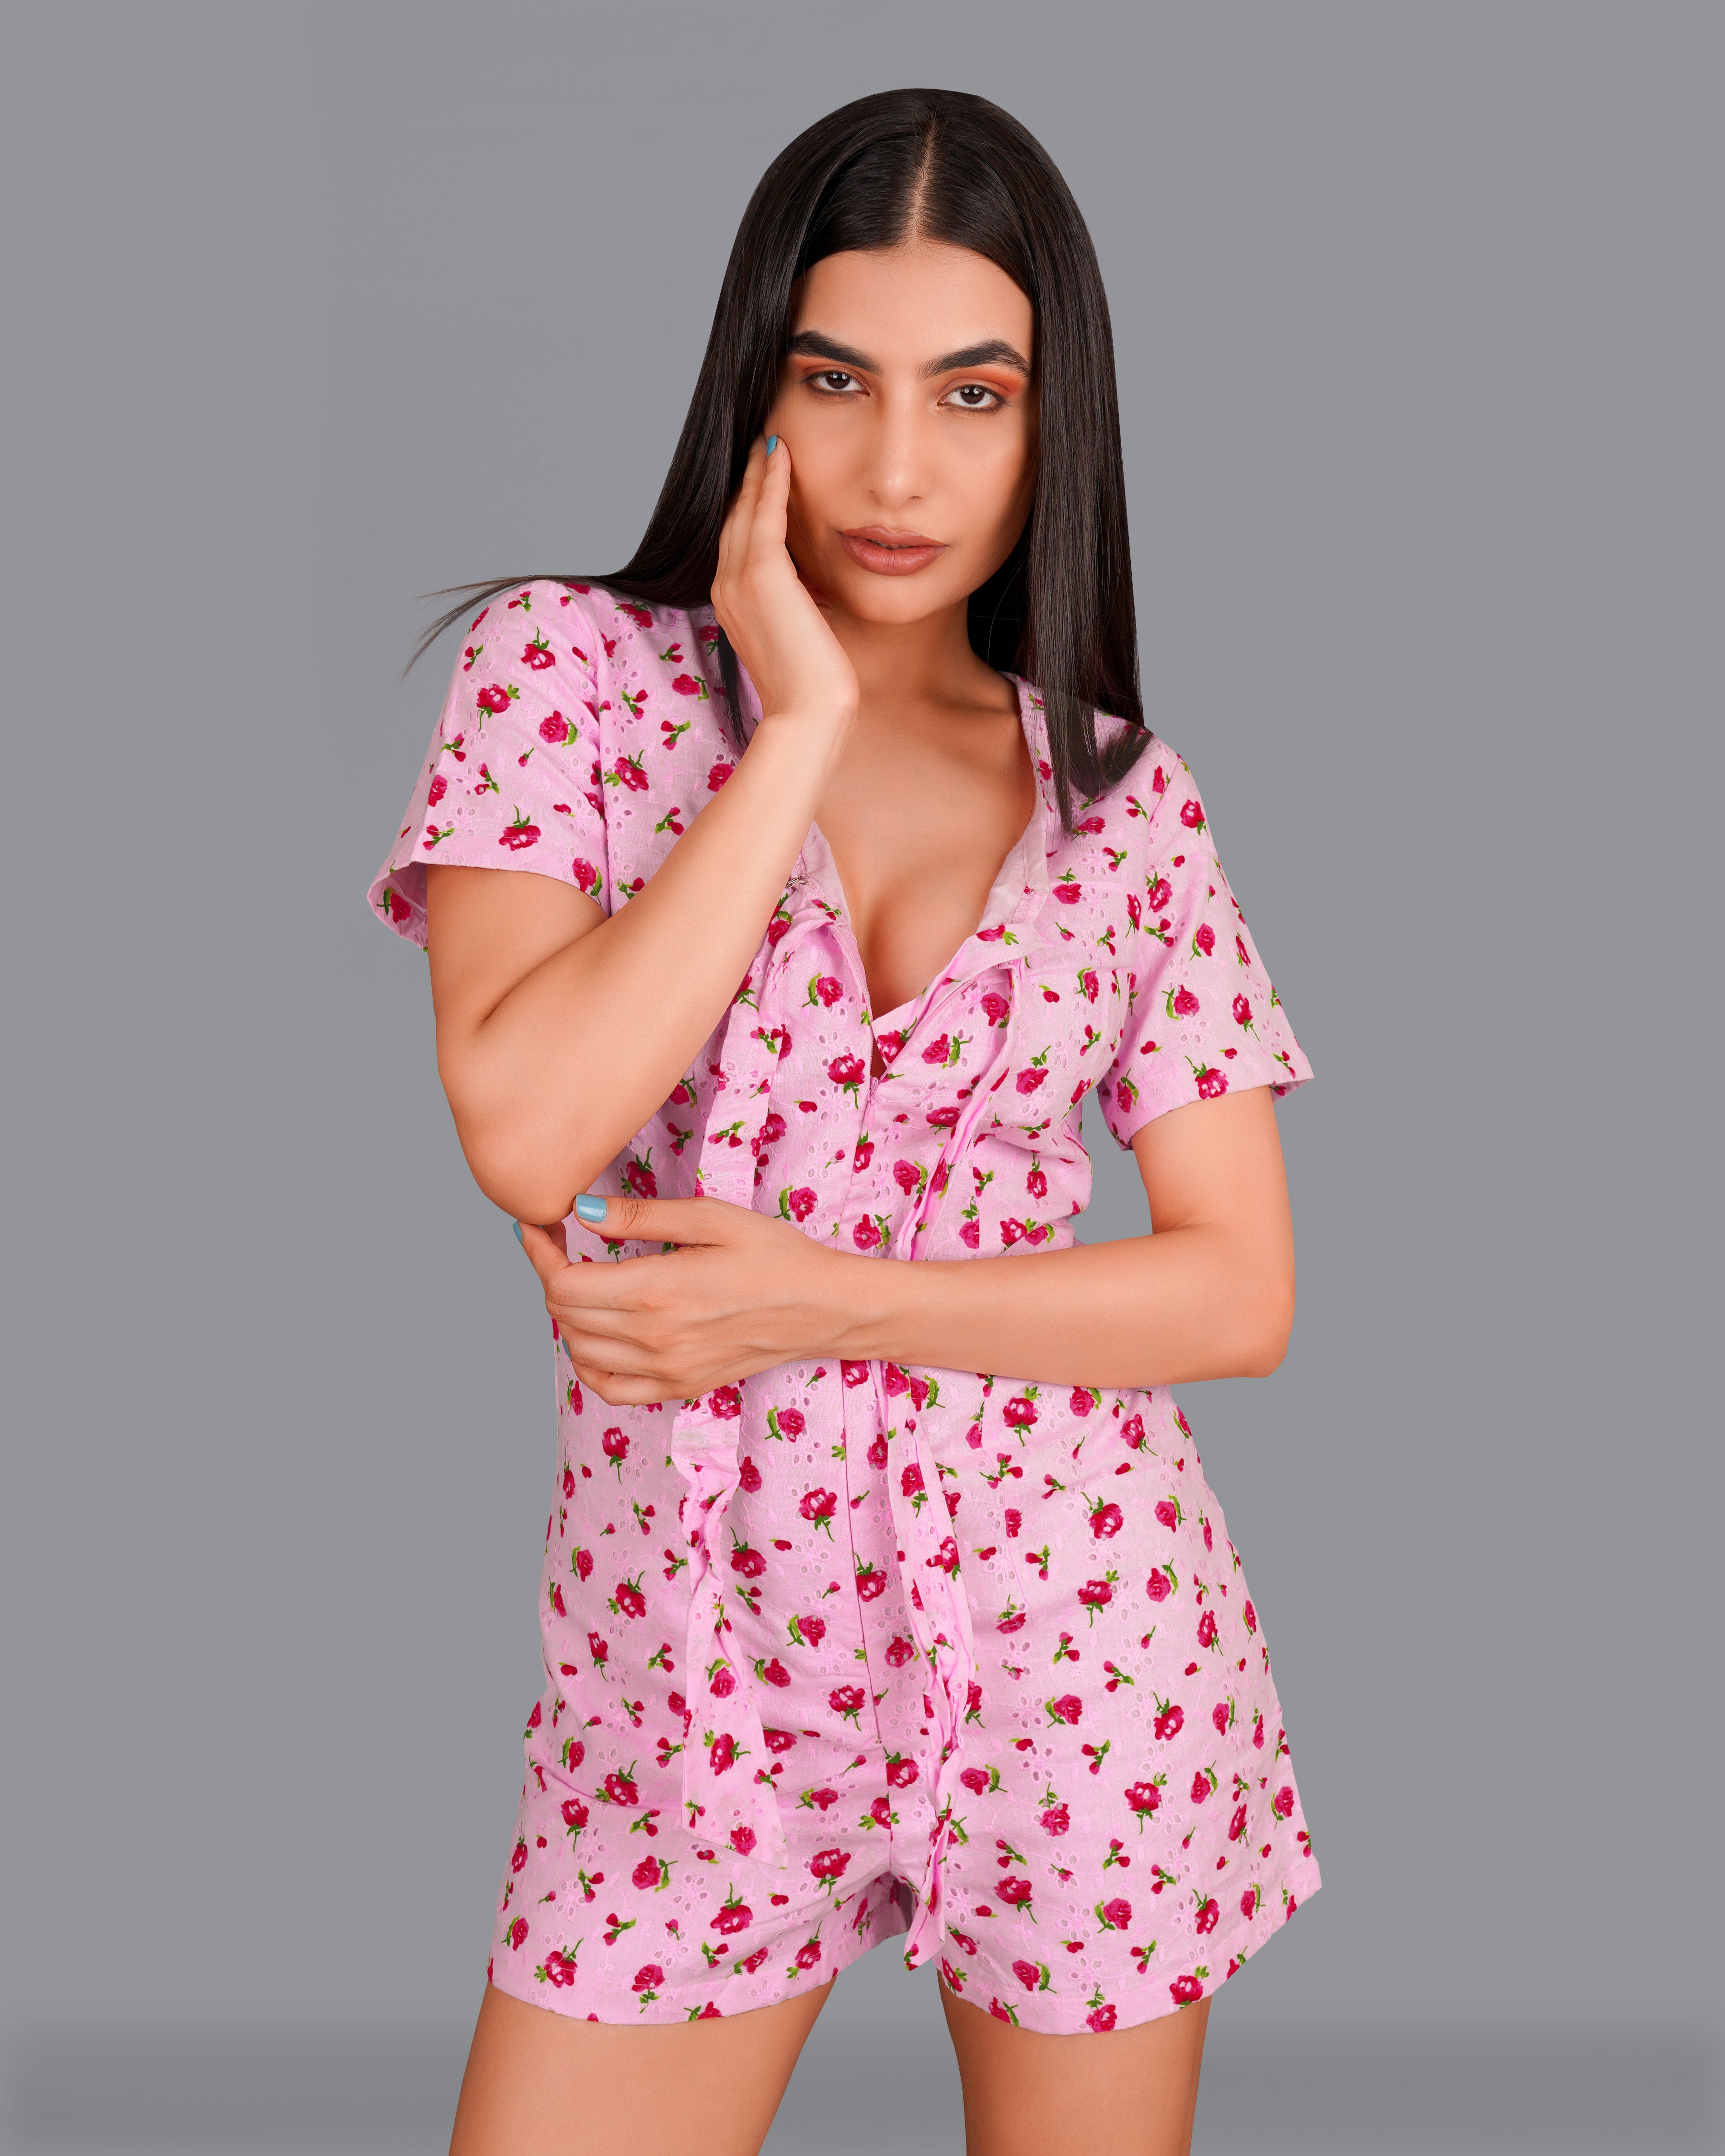 Blossom Pink Rose Printed Premium Cotton Jumpsuit WD007-32, WD007-34, WD007-36, WD007-38, WD007-40, WD007-42